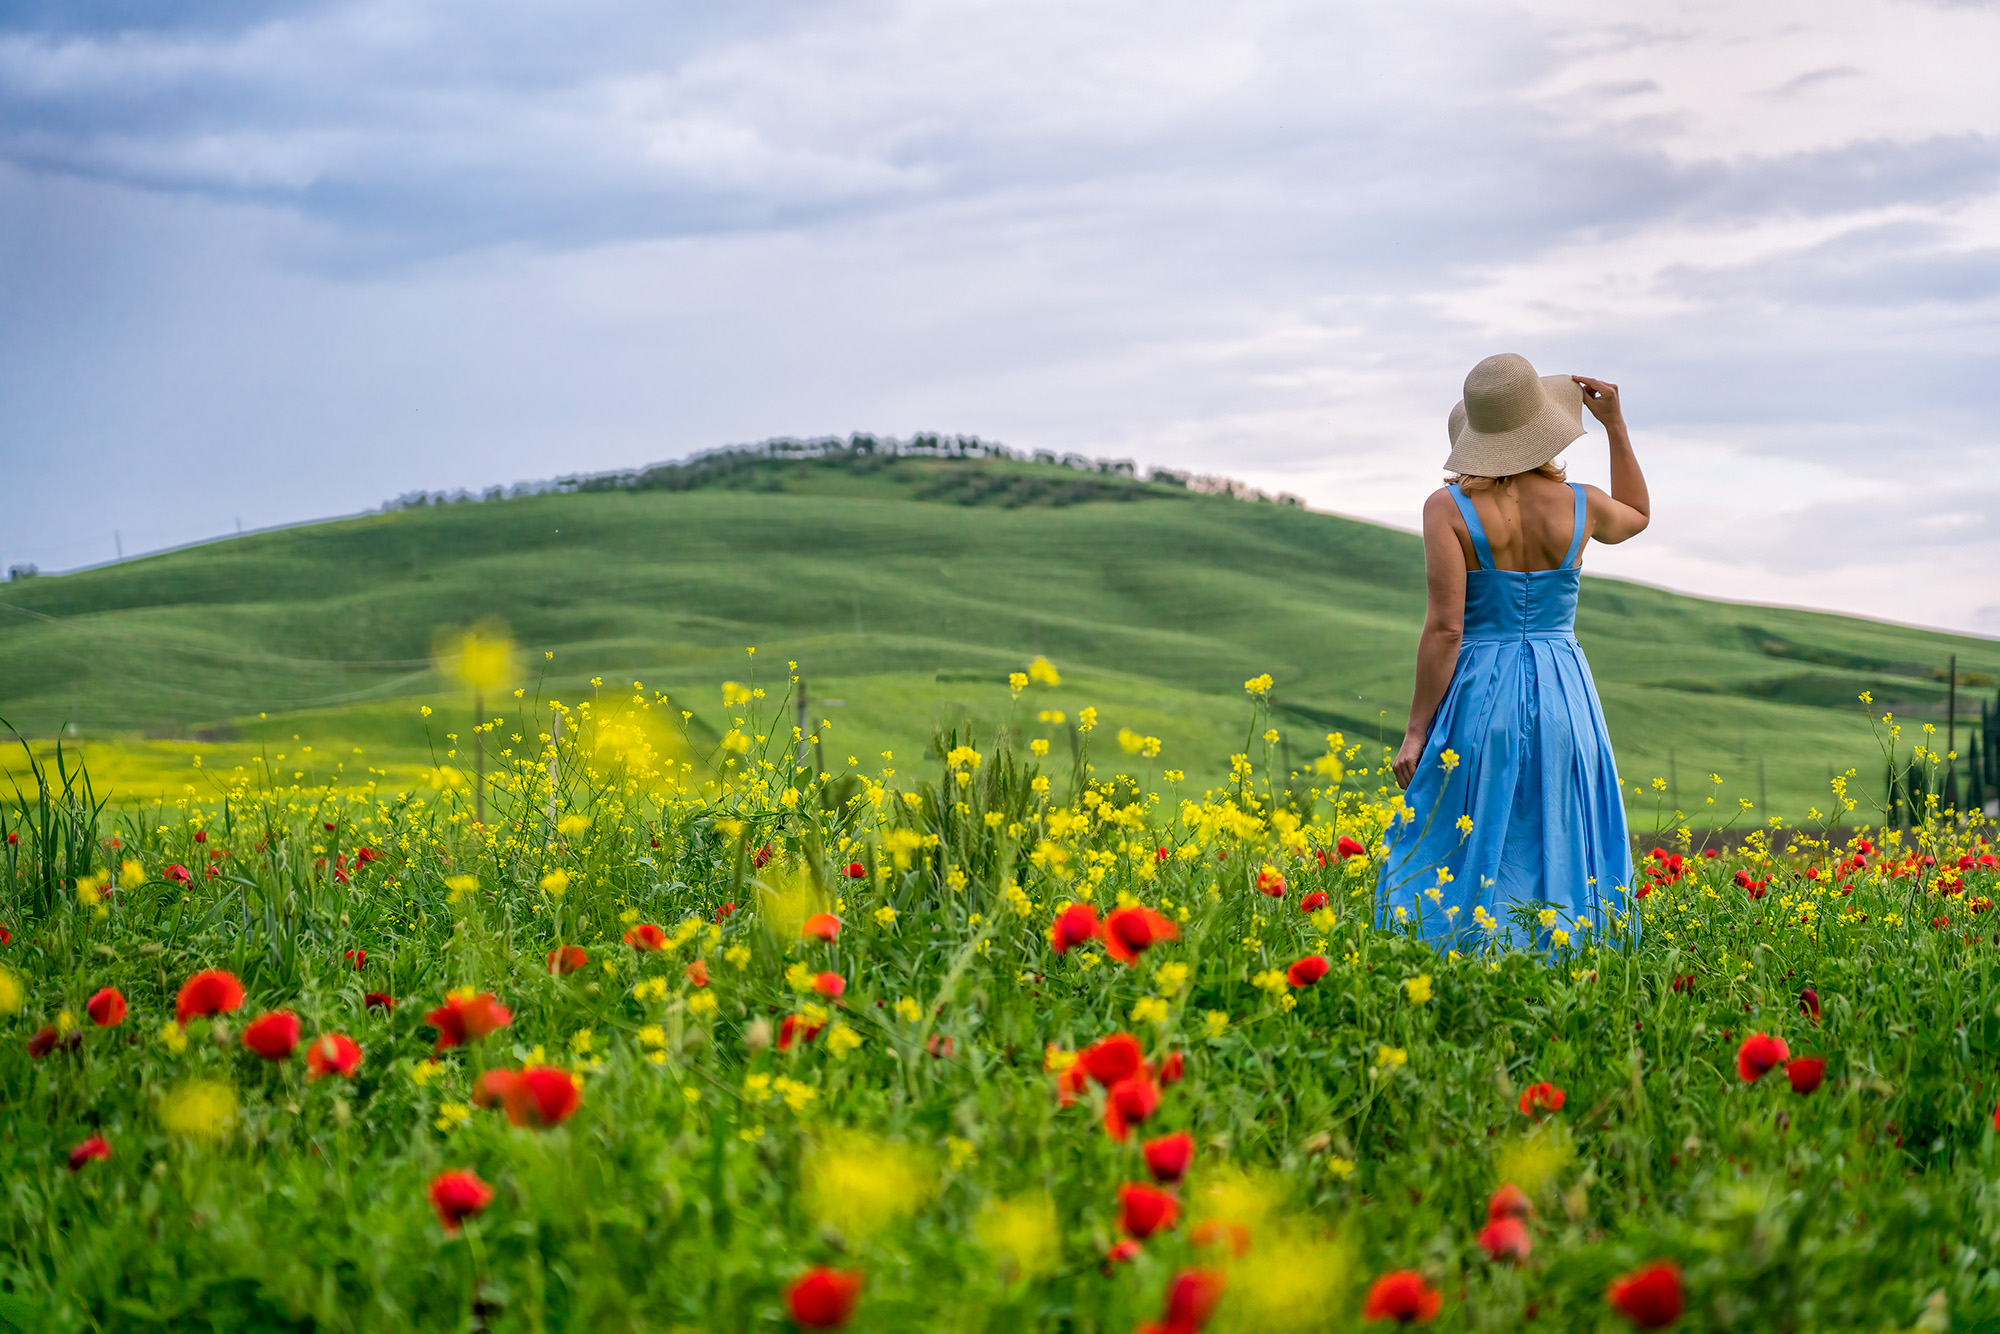 In the enchanting springtime of Tuscany, Maria graciously became our stunning model, posing amidst a breathtaking field of poppies...